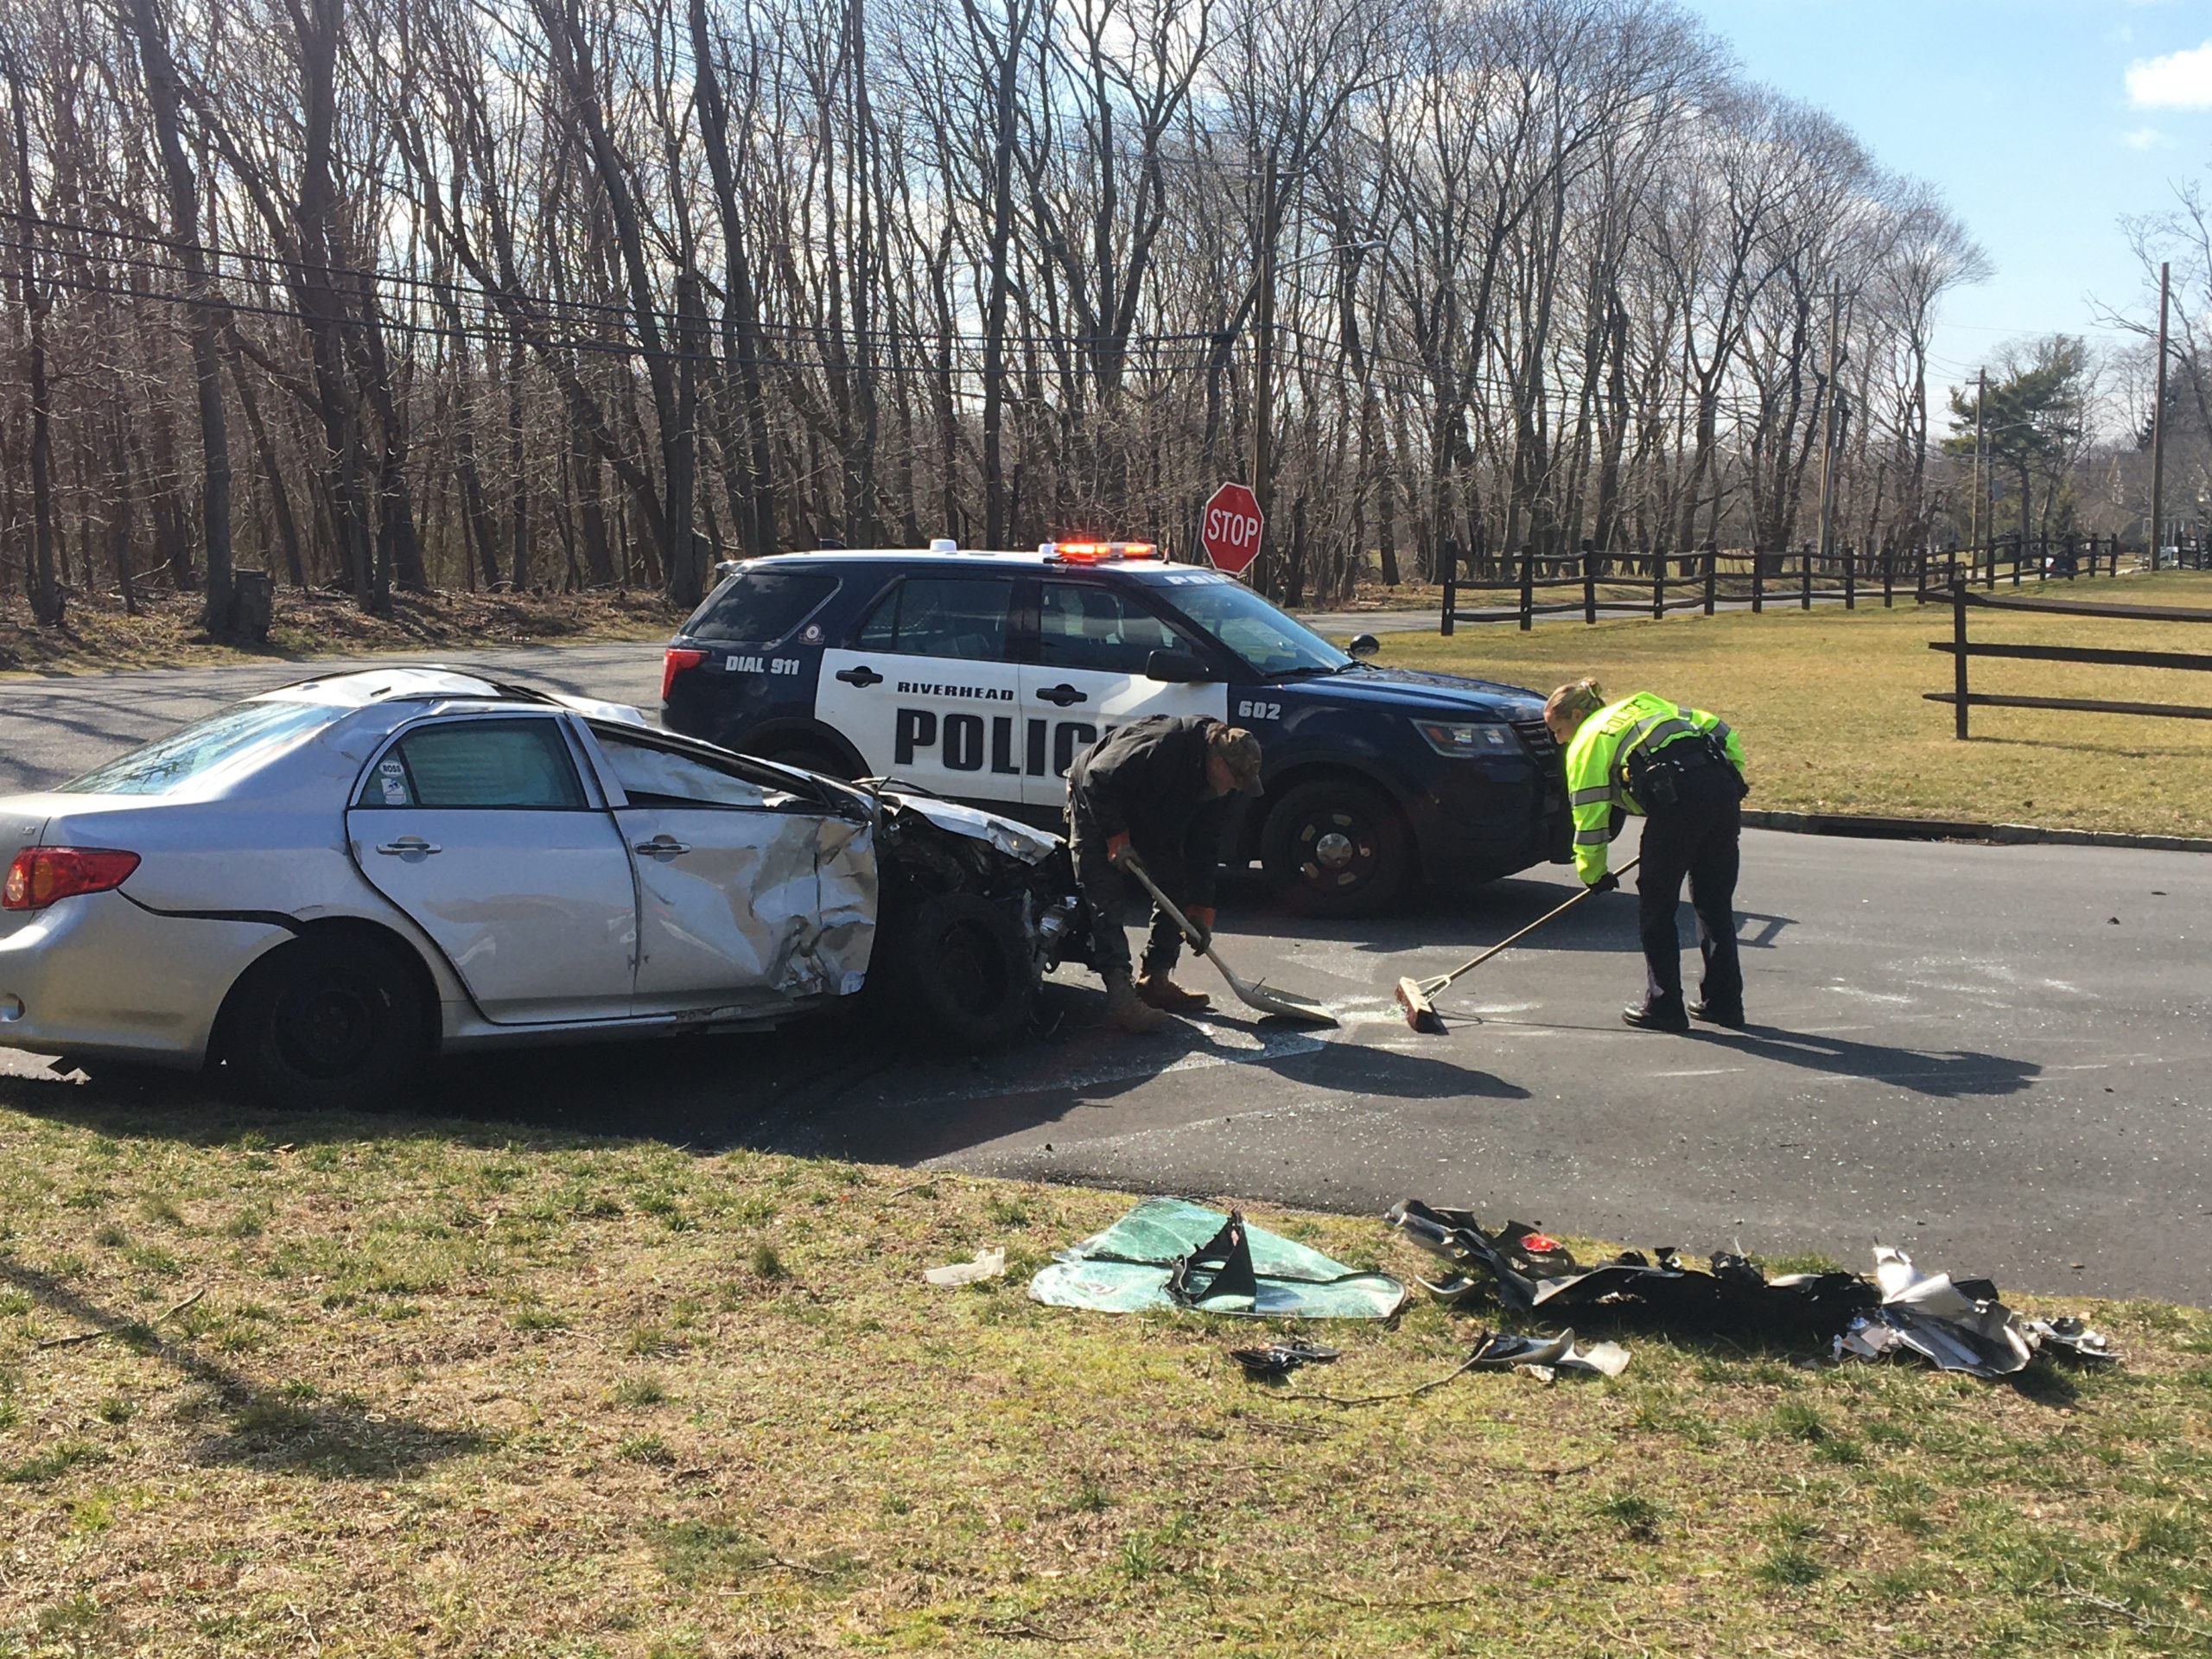 Minor Injuries Reported Following Rollover Crash In Riverhead Riverhead News Review 3261